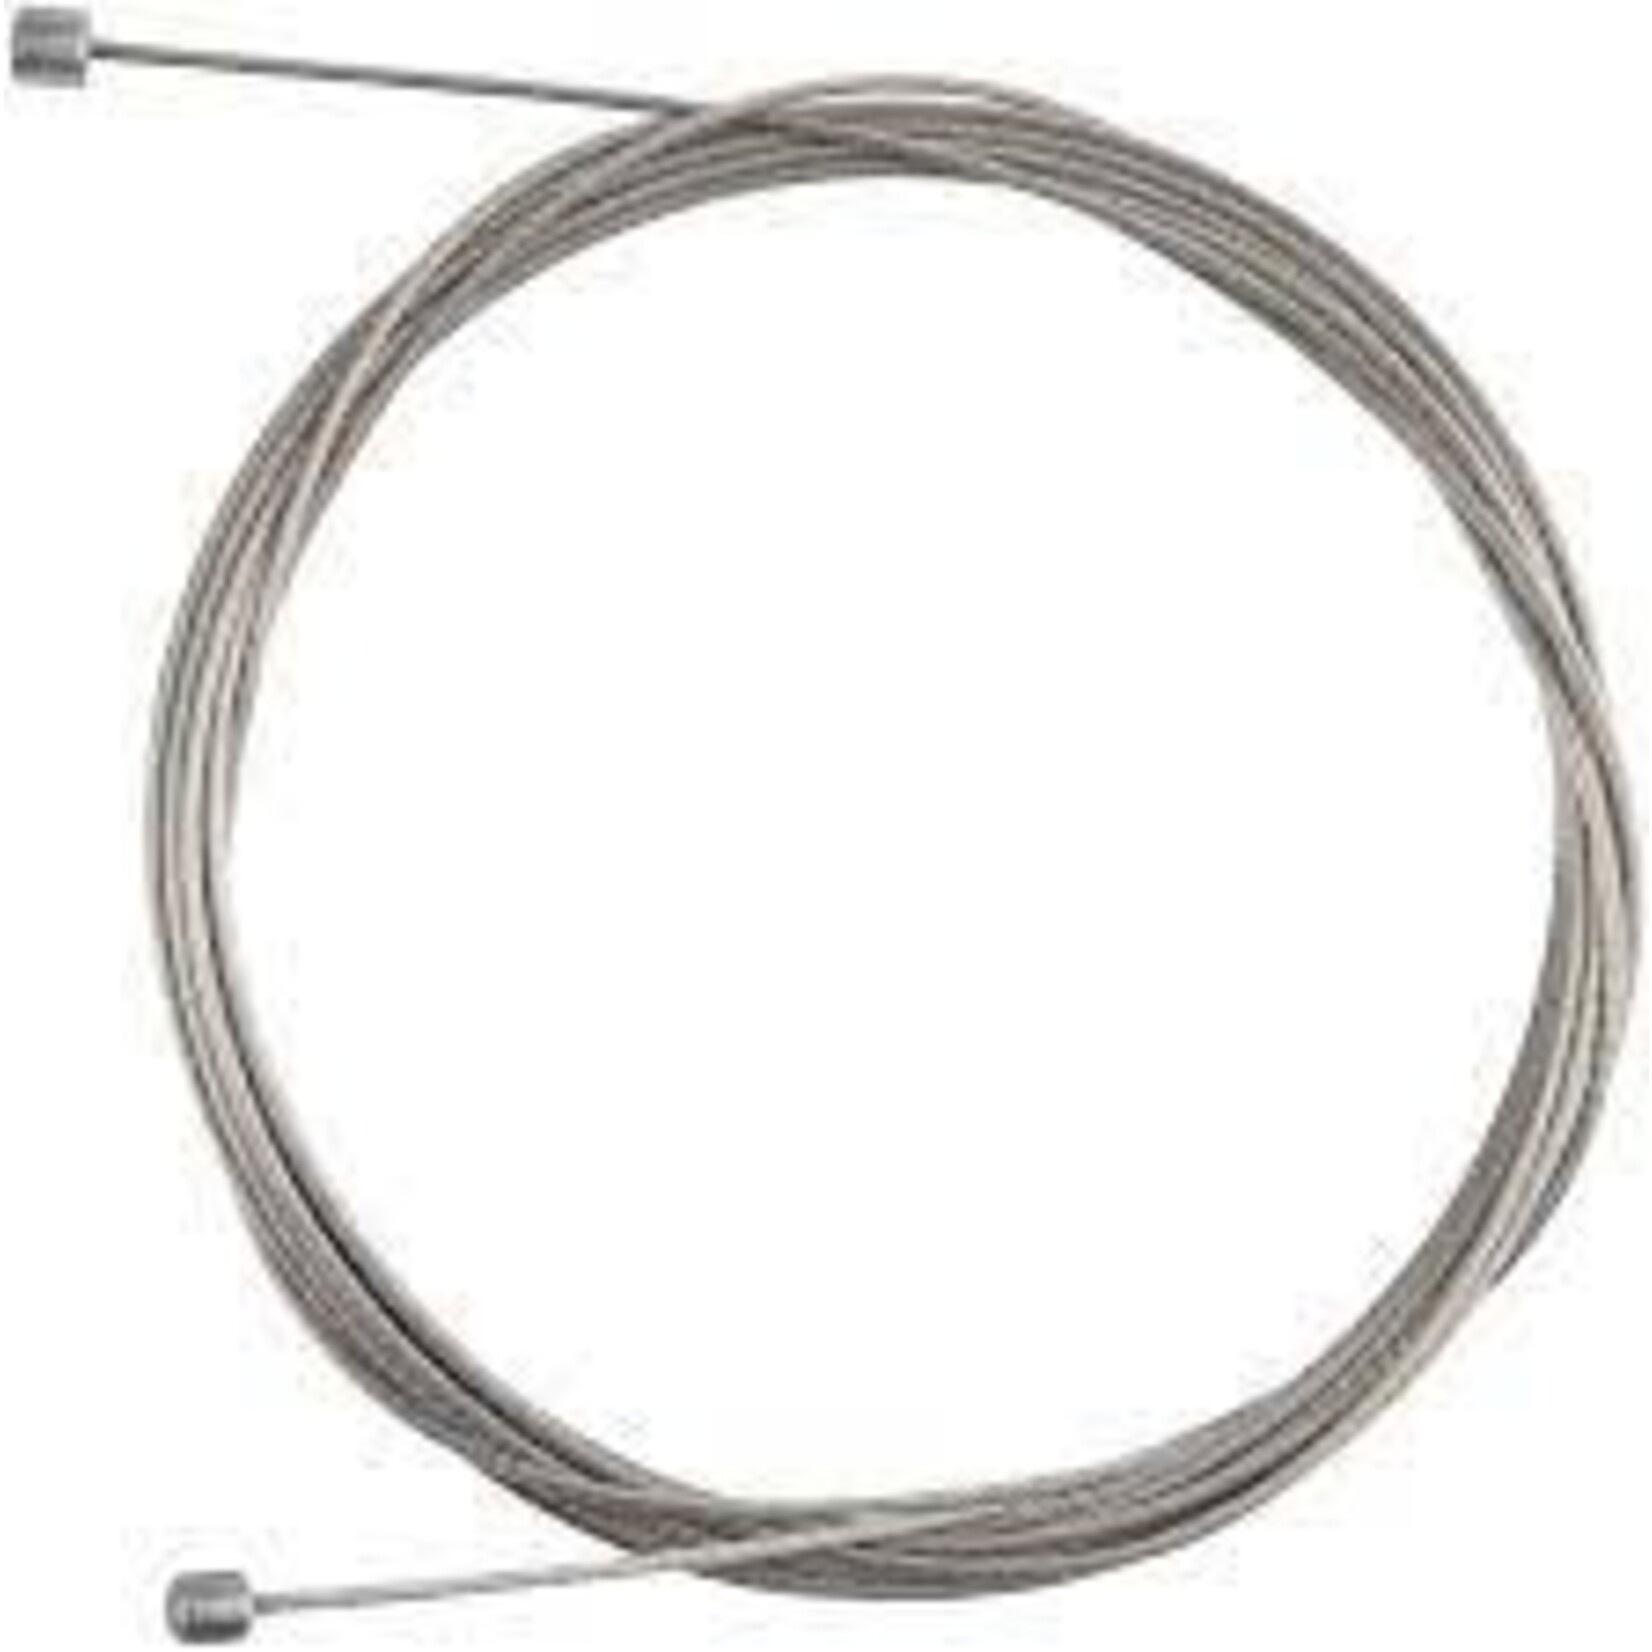 Jagwire Jagwire Stainless Steel Shift Cable, 1.1mm x 3100mm